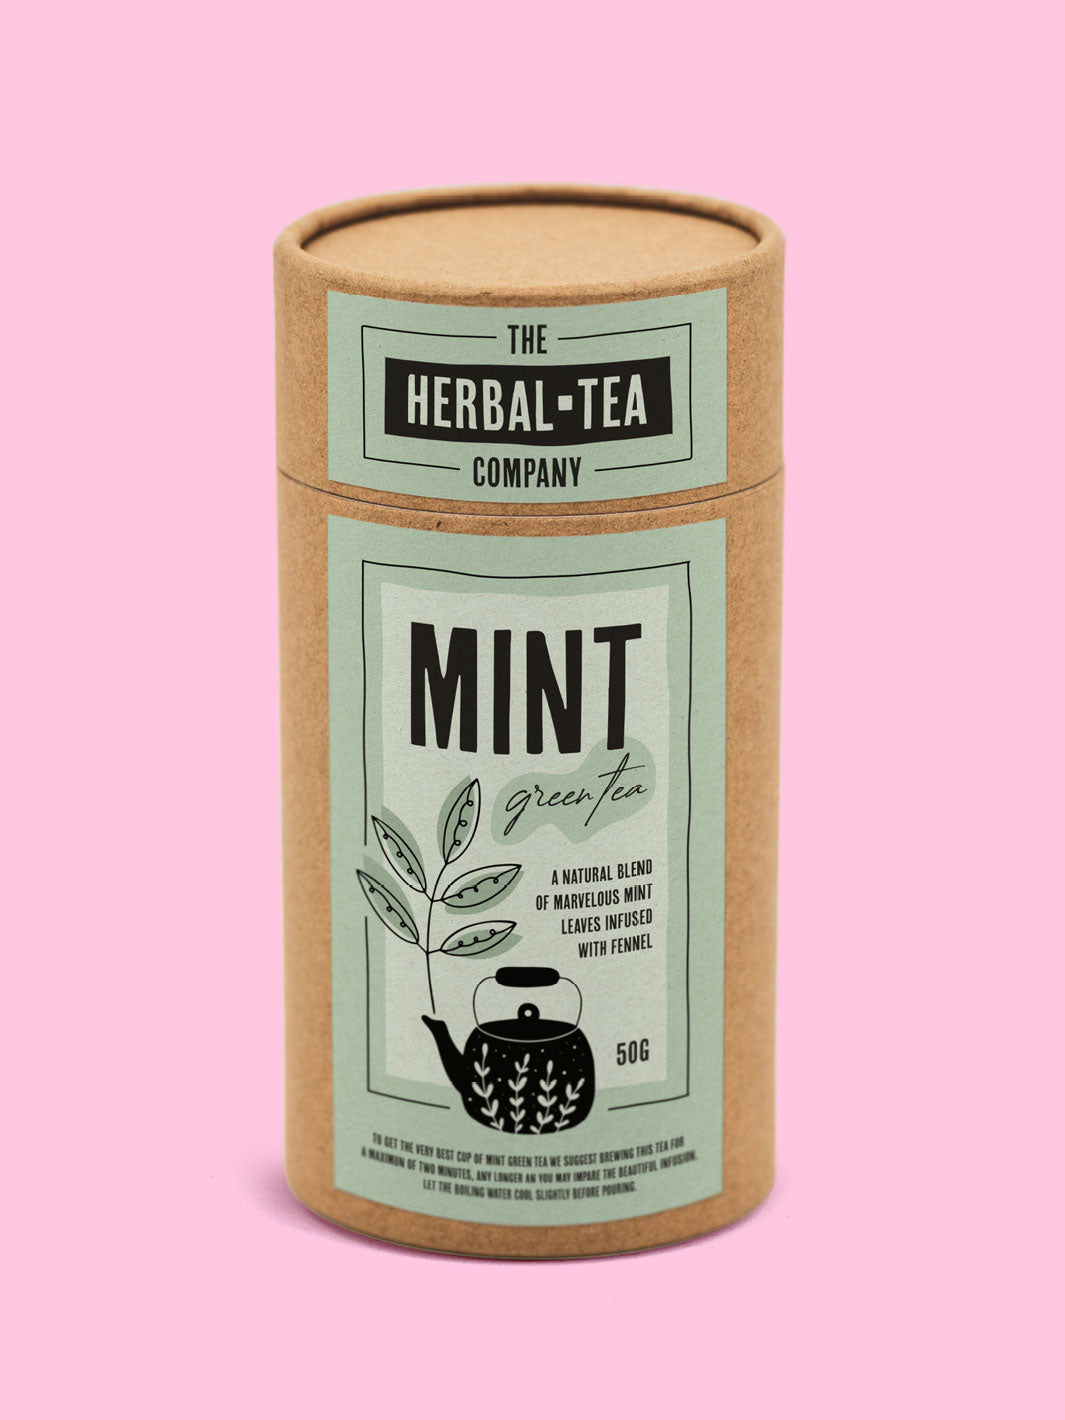 A picture of a cardboard tube packaging with a herbal tea label against a pink background.